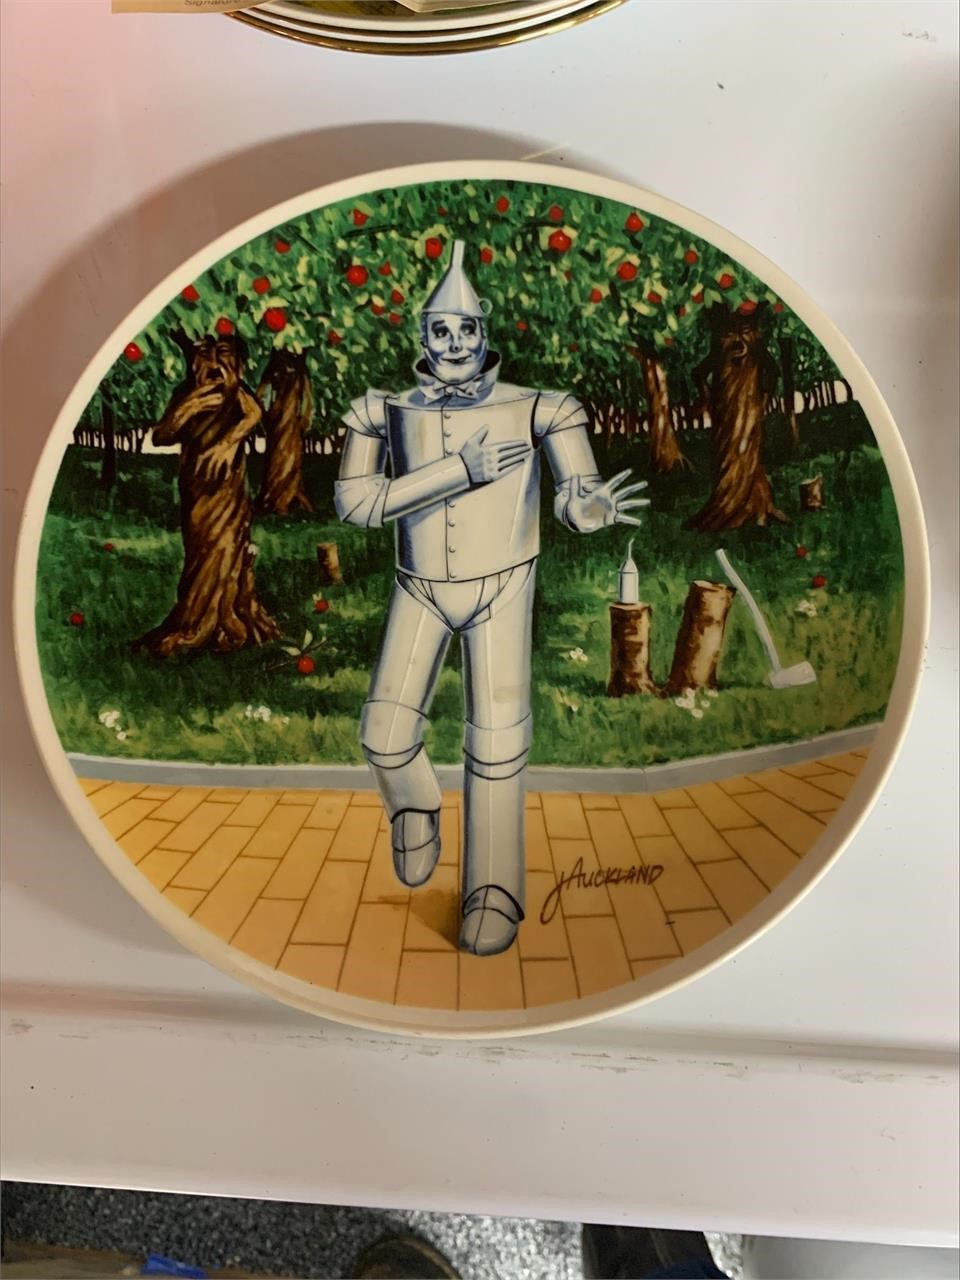 Collector plate